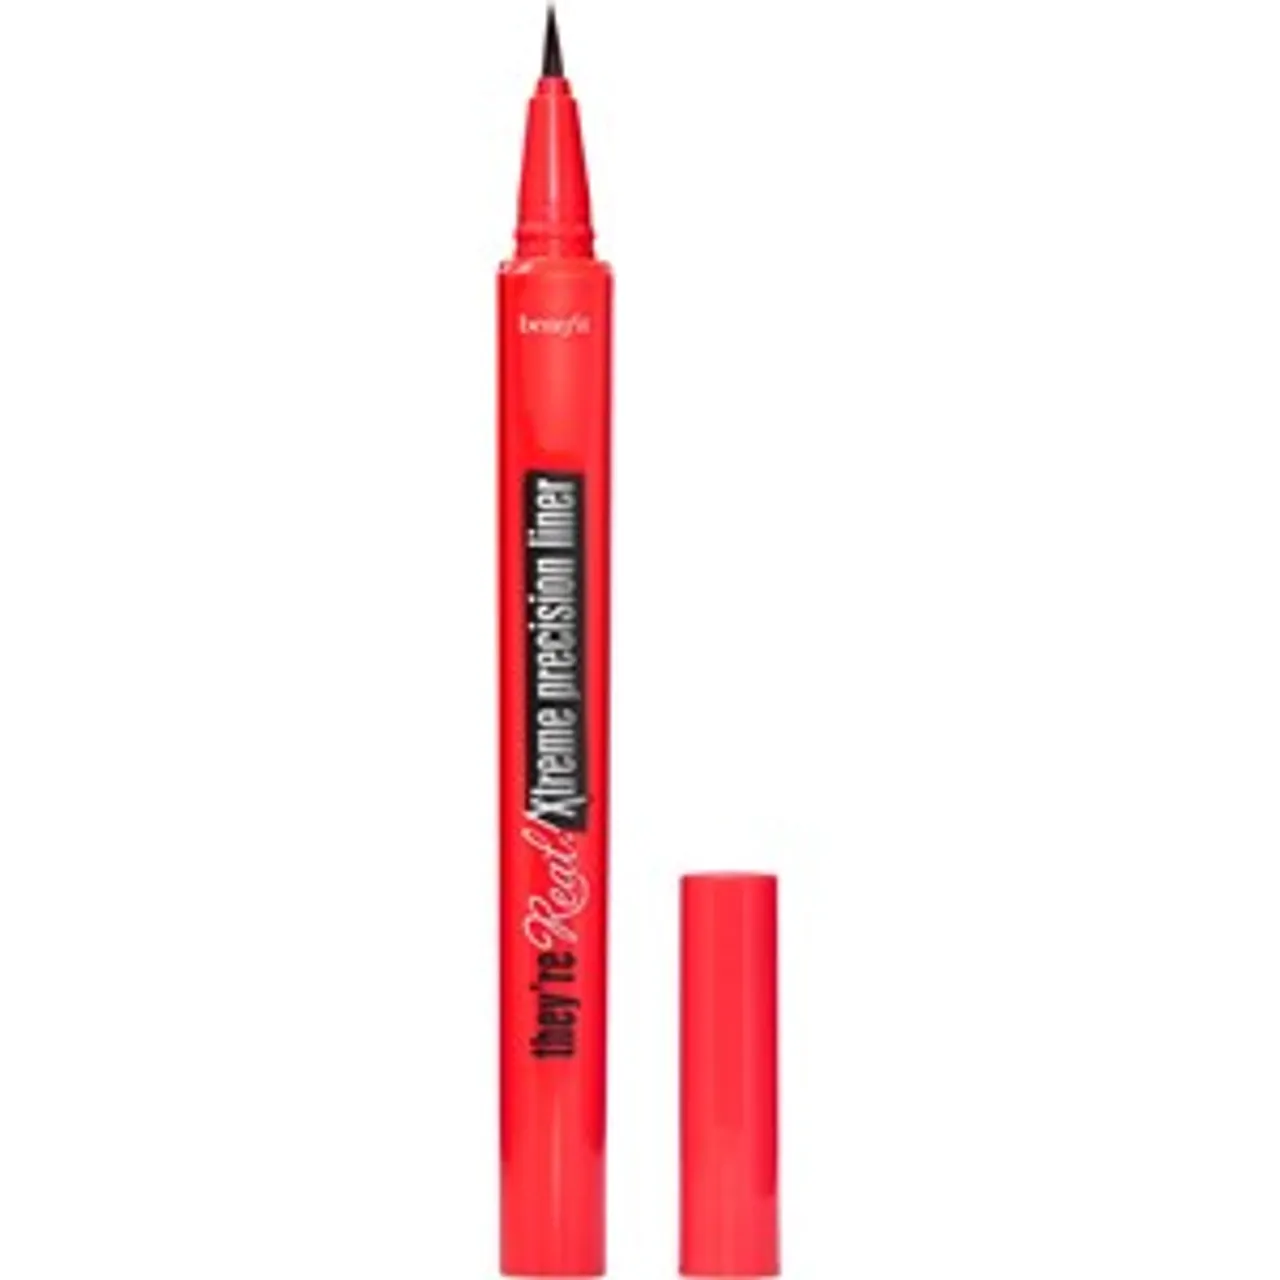 Benefit They're Real! Xtreme Precision Liner Female 10 g